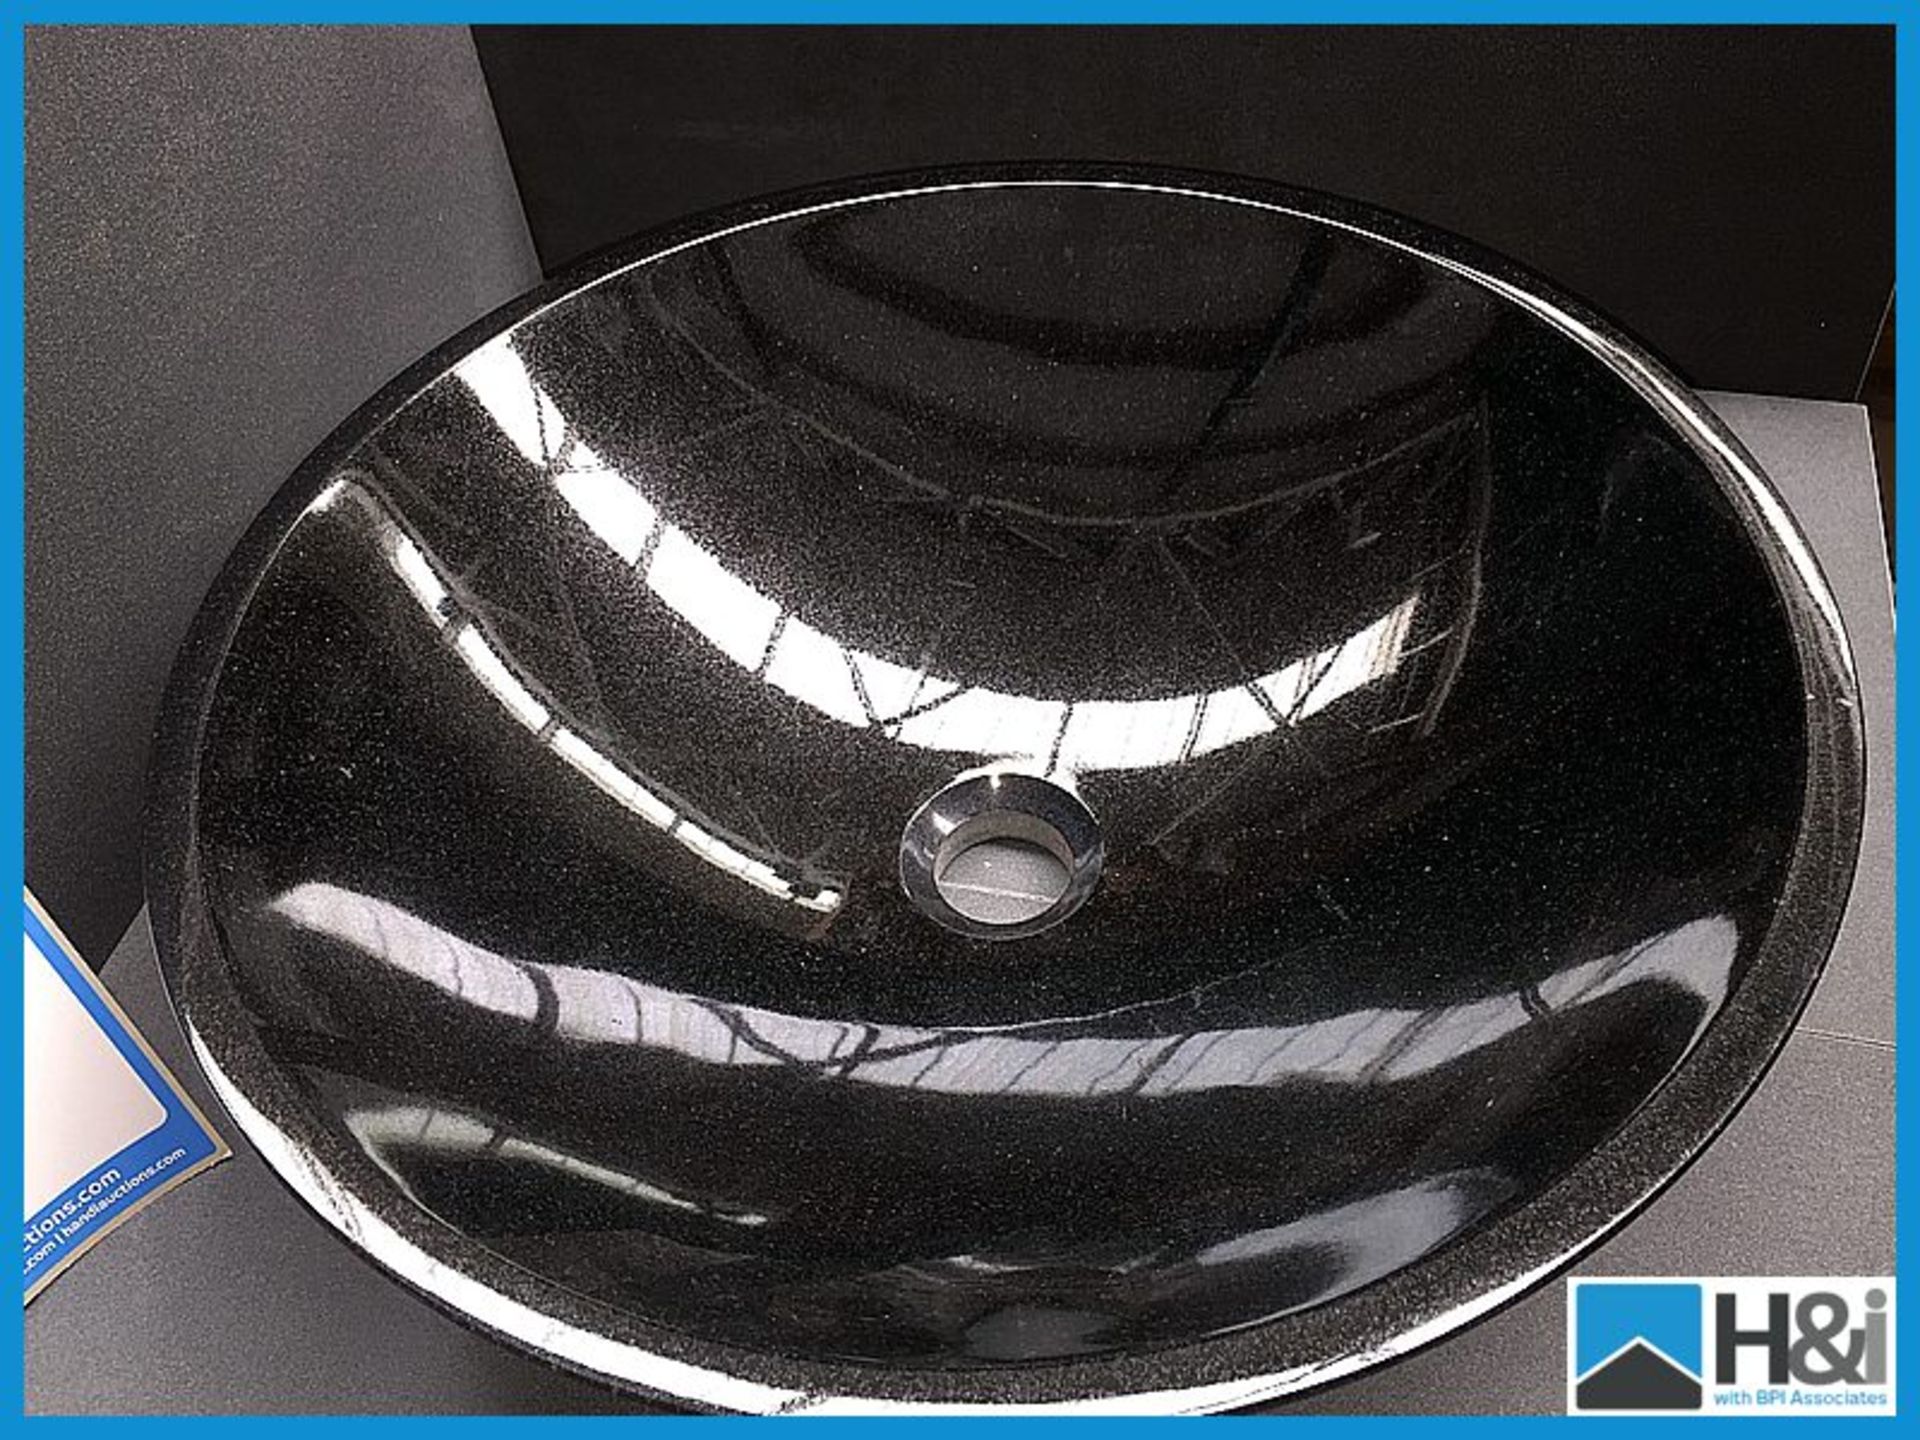 Absolute black polished granite Torro large basin. 430 x 140 x 20 thick wall Appraisal: Good - Image 2 of 3